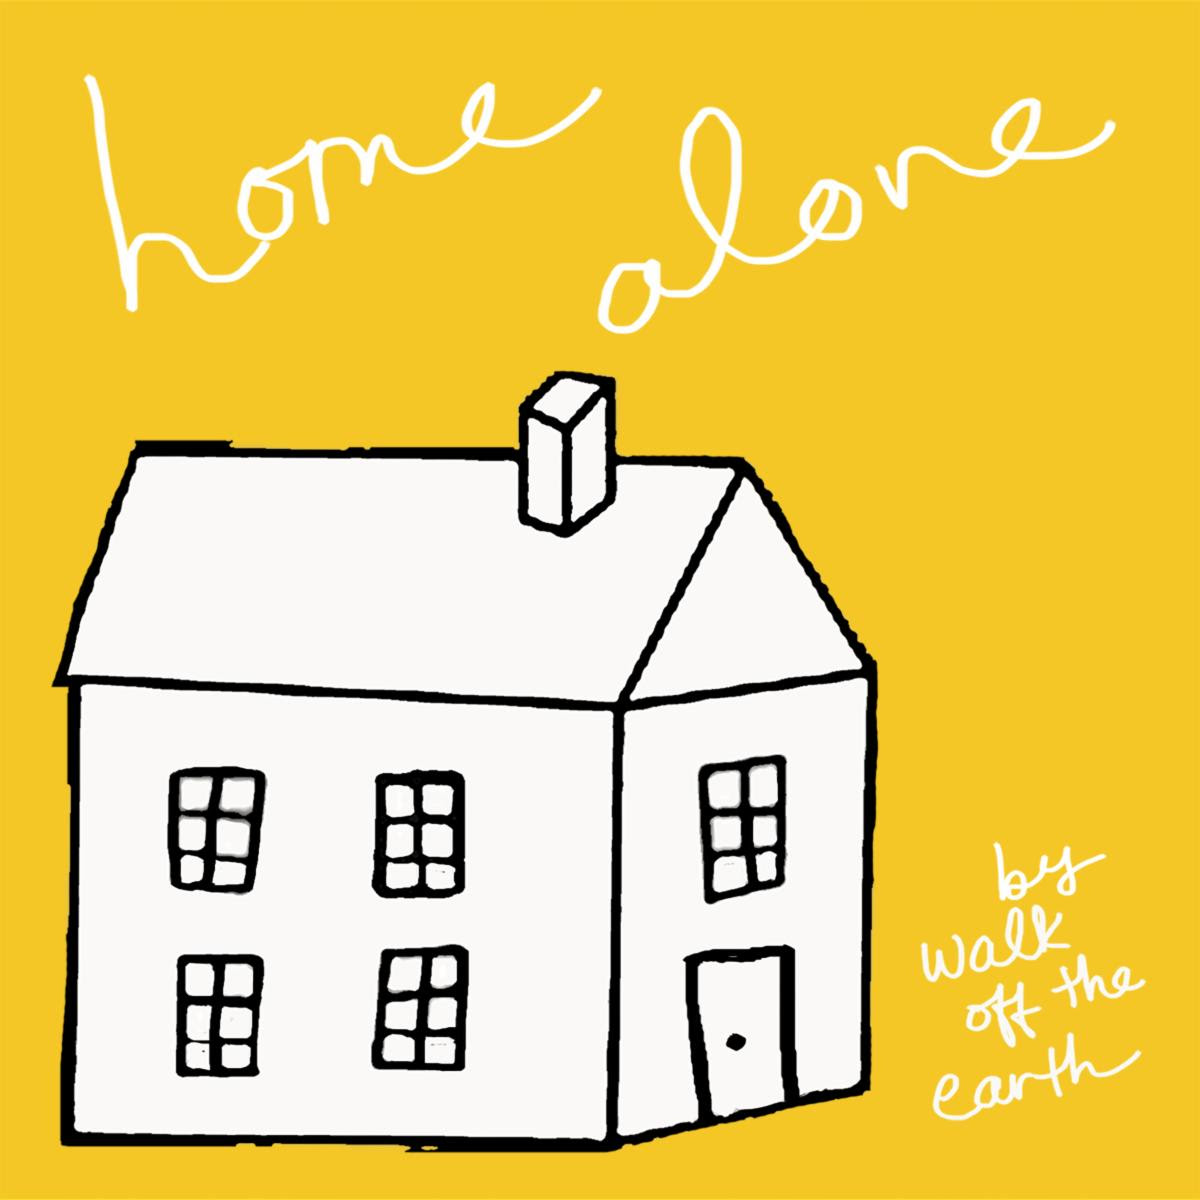 WALK OFF THE EARTH SHARES NEW ANTHEM “HOME ALONE” OFF FORTHCOMING ALBUM HERE WE GO!